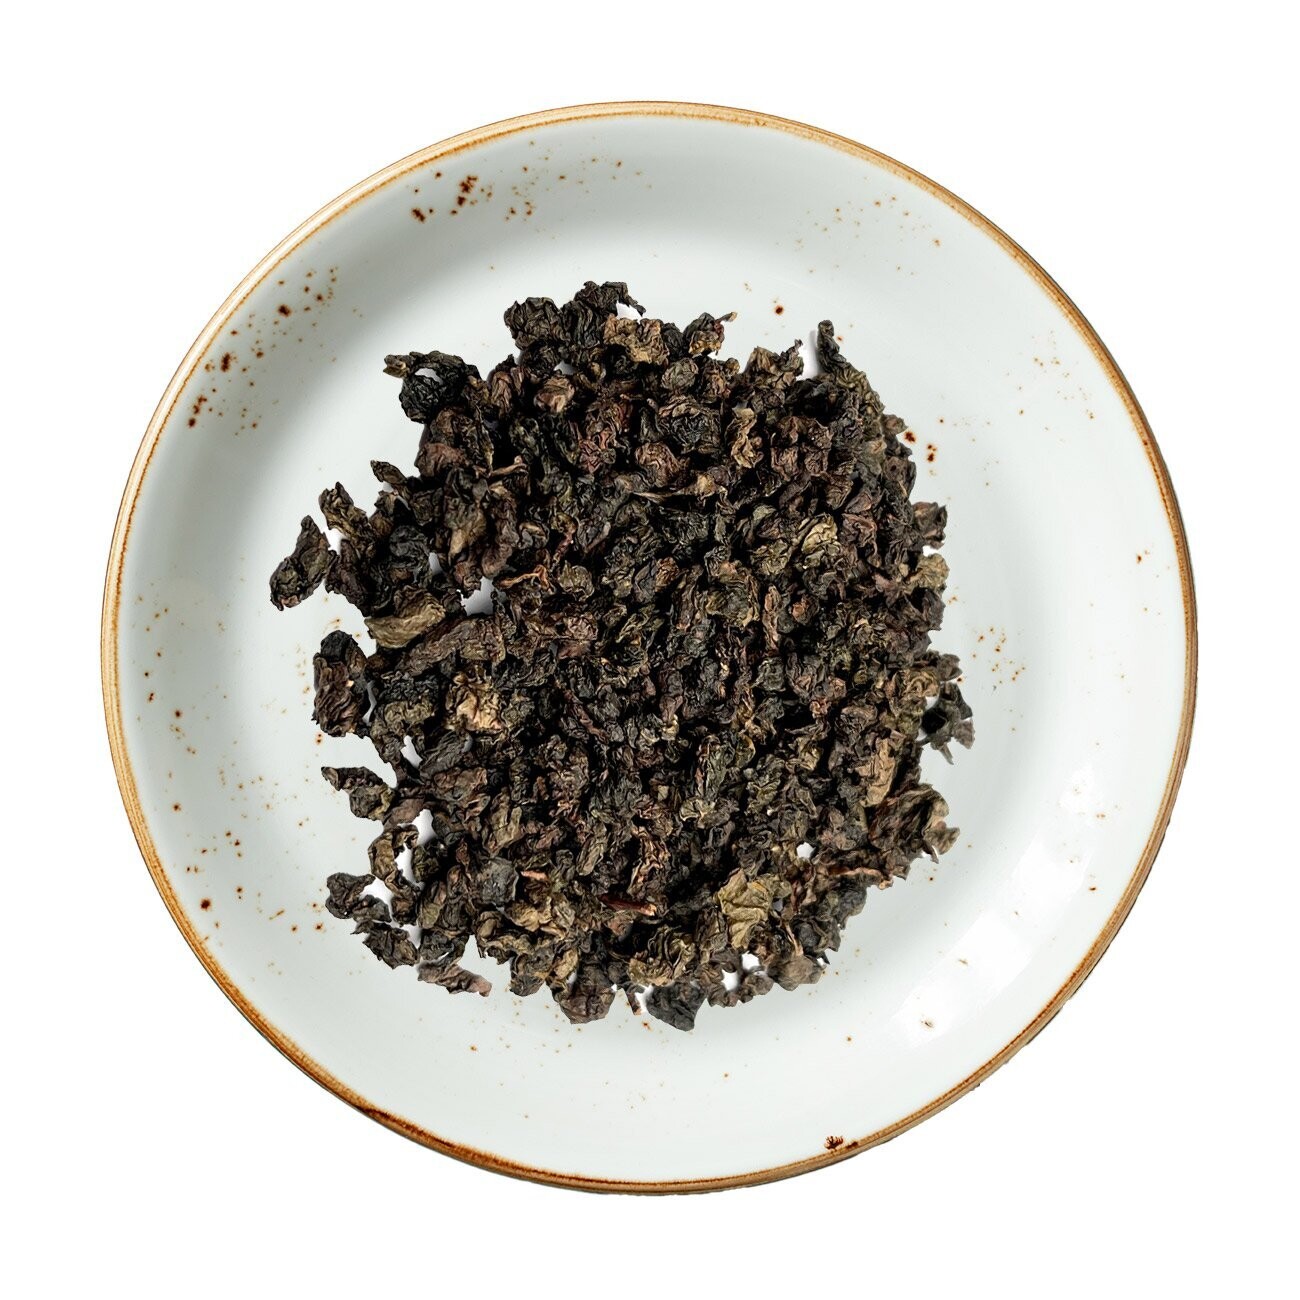 Charcoal Roasted Tie Guan Yin Oolong Tea, Size: One Ounce (28 grams)